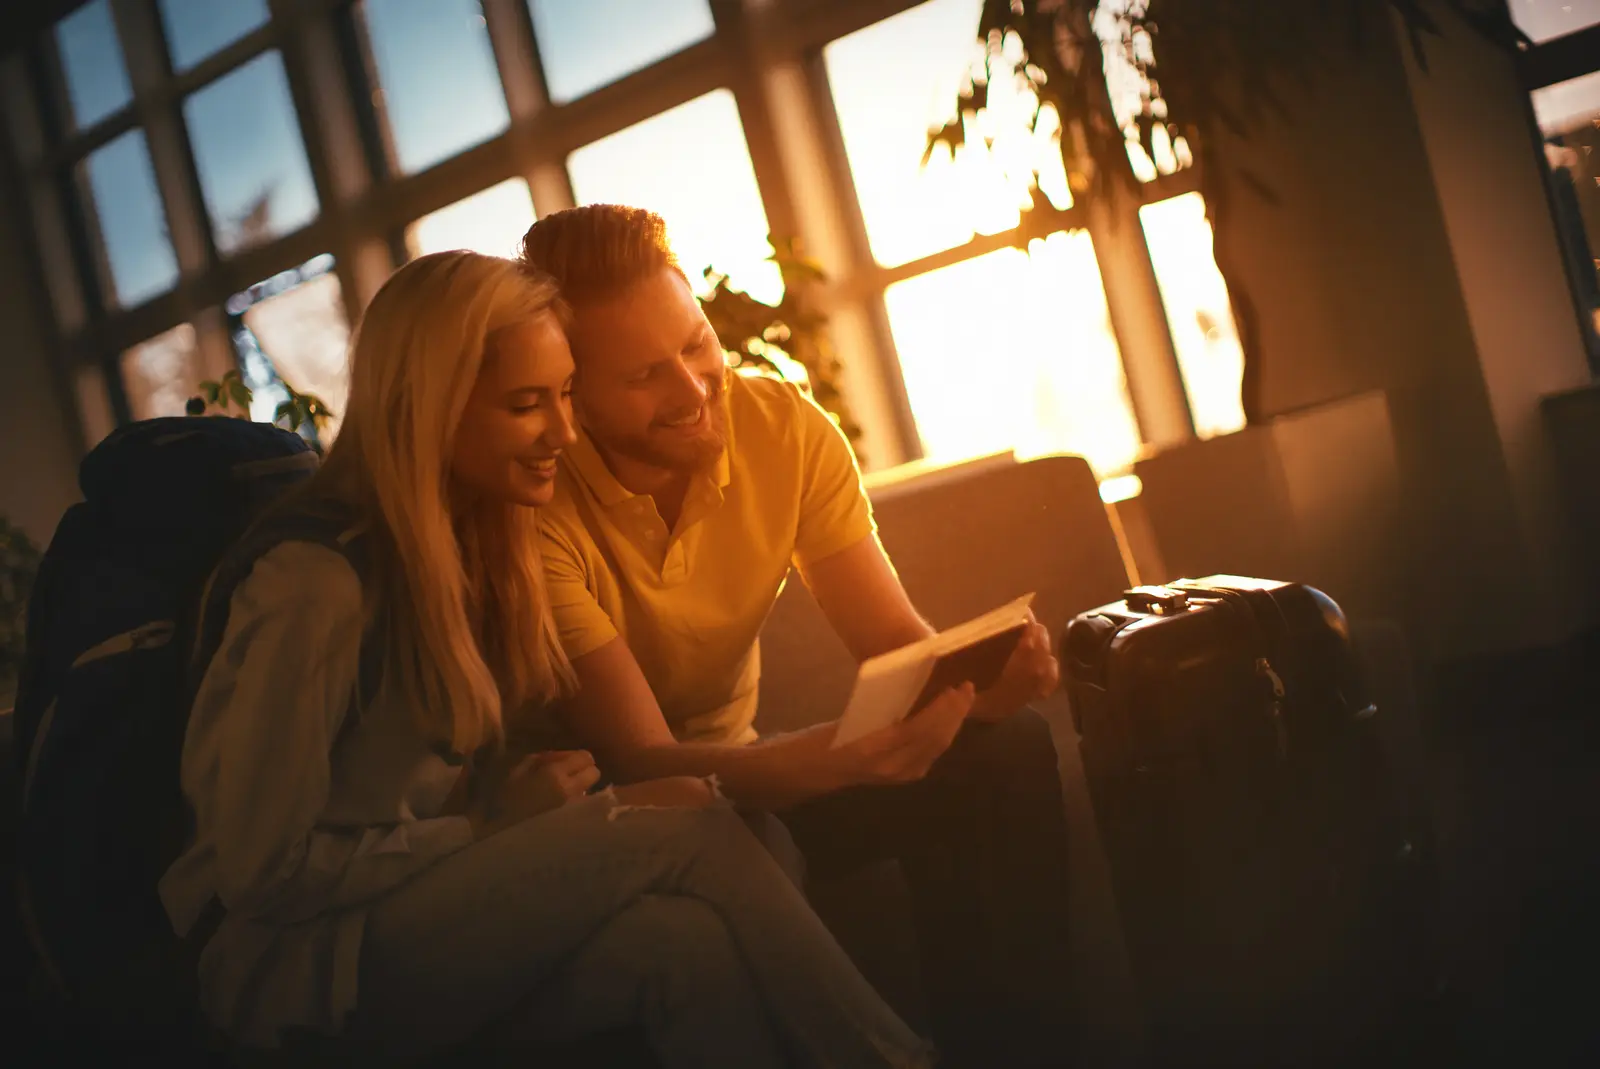 Travel insurance: travel securely with the right insurance